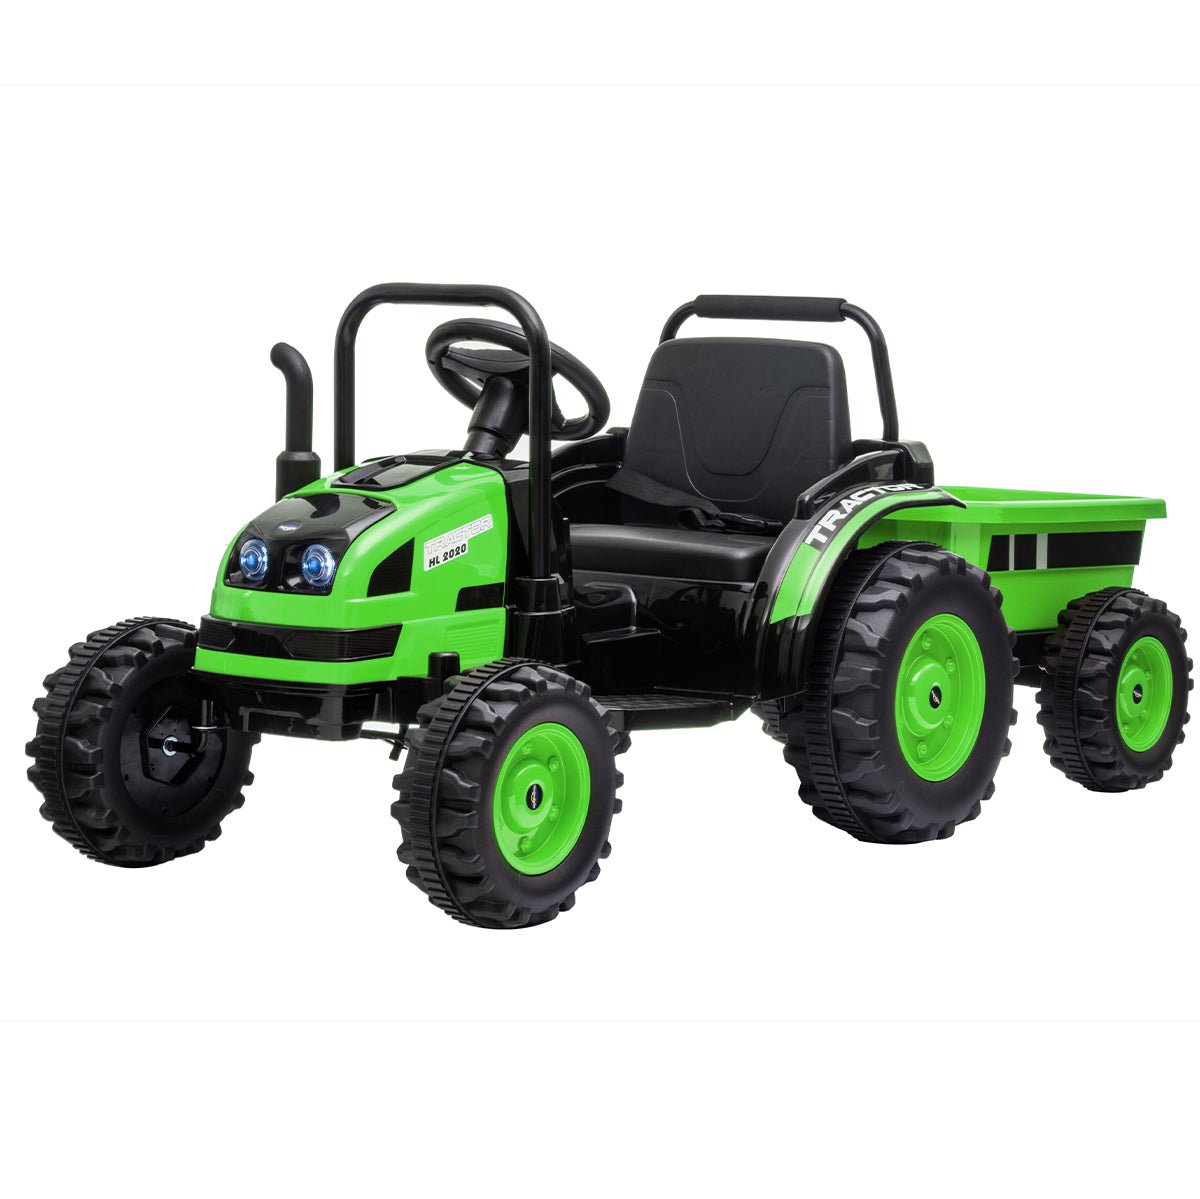 Outdoortoys 12V Electric Ride On Tractor with Tipper Trailer